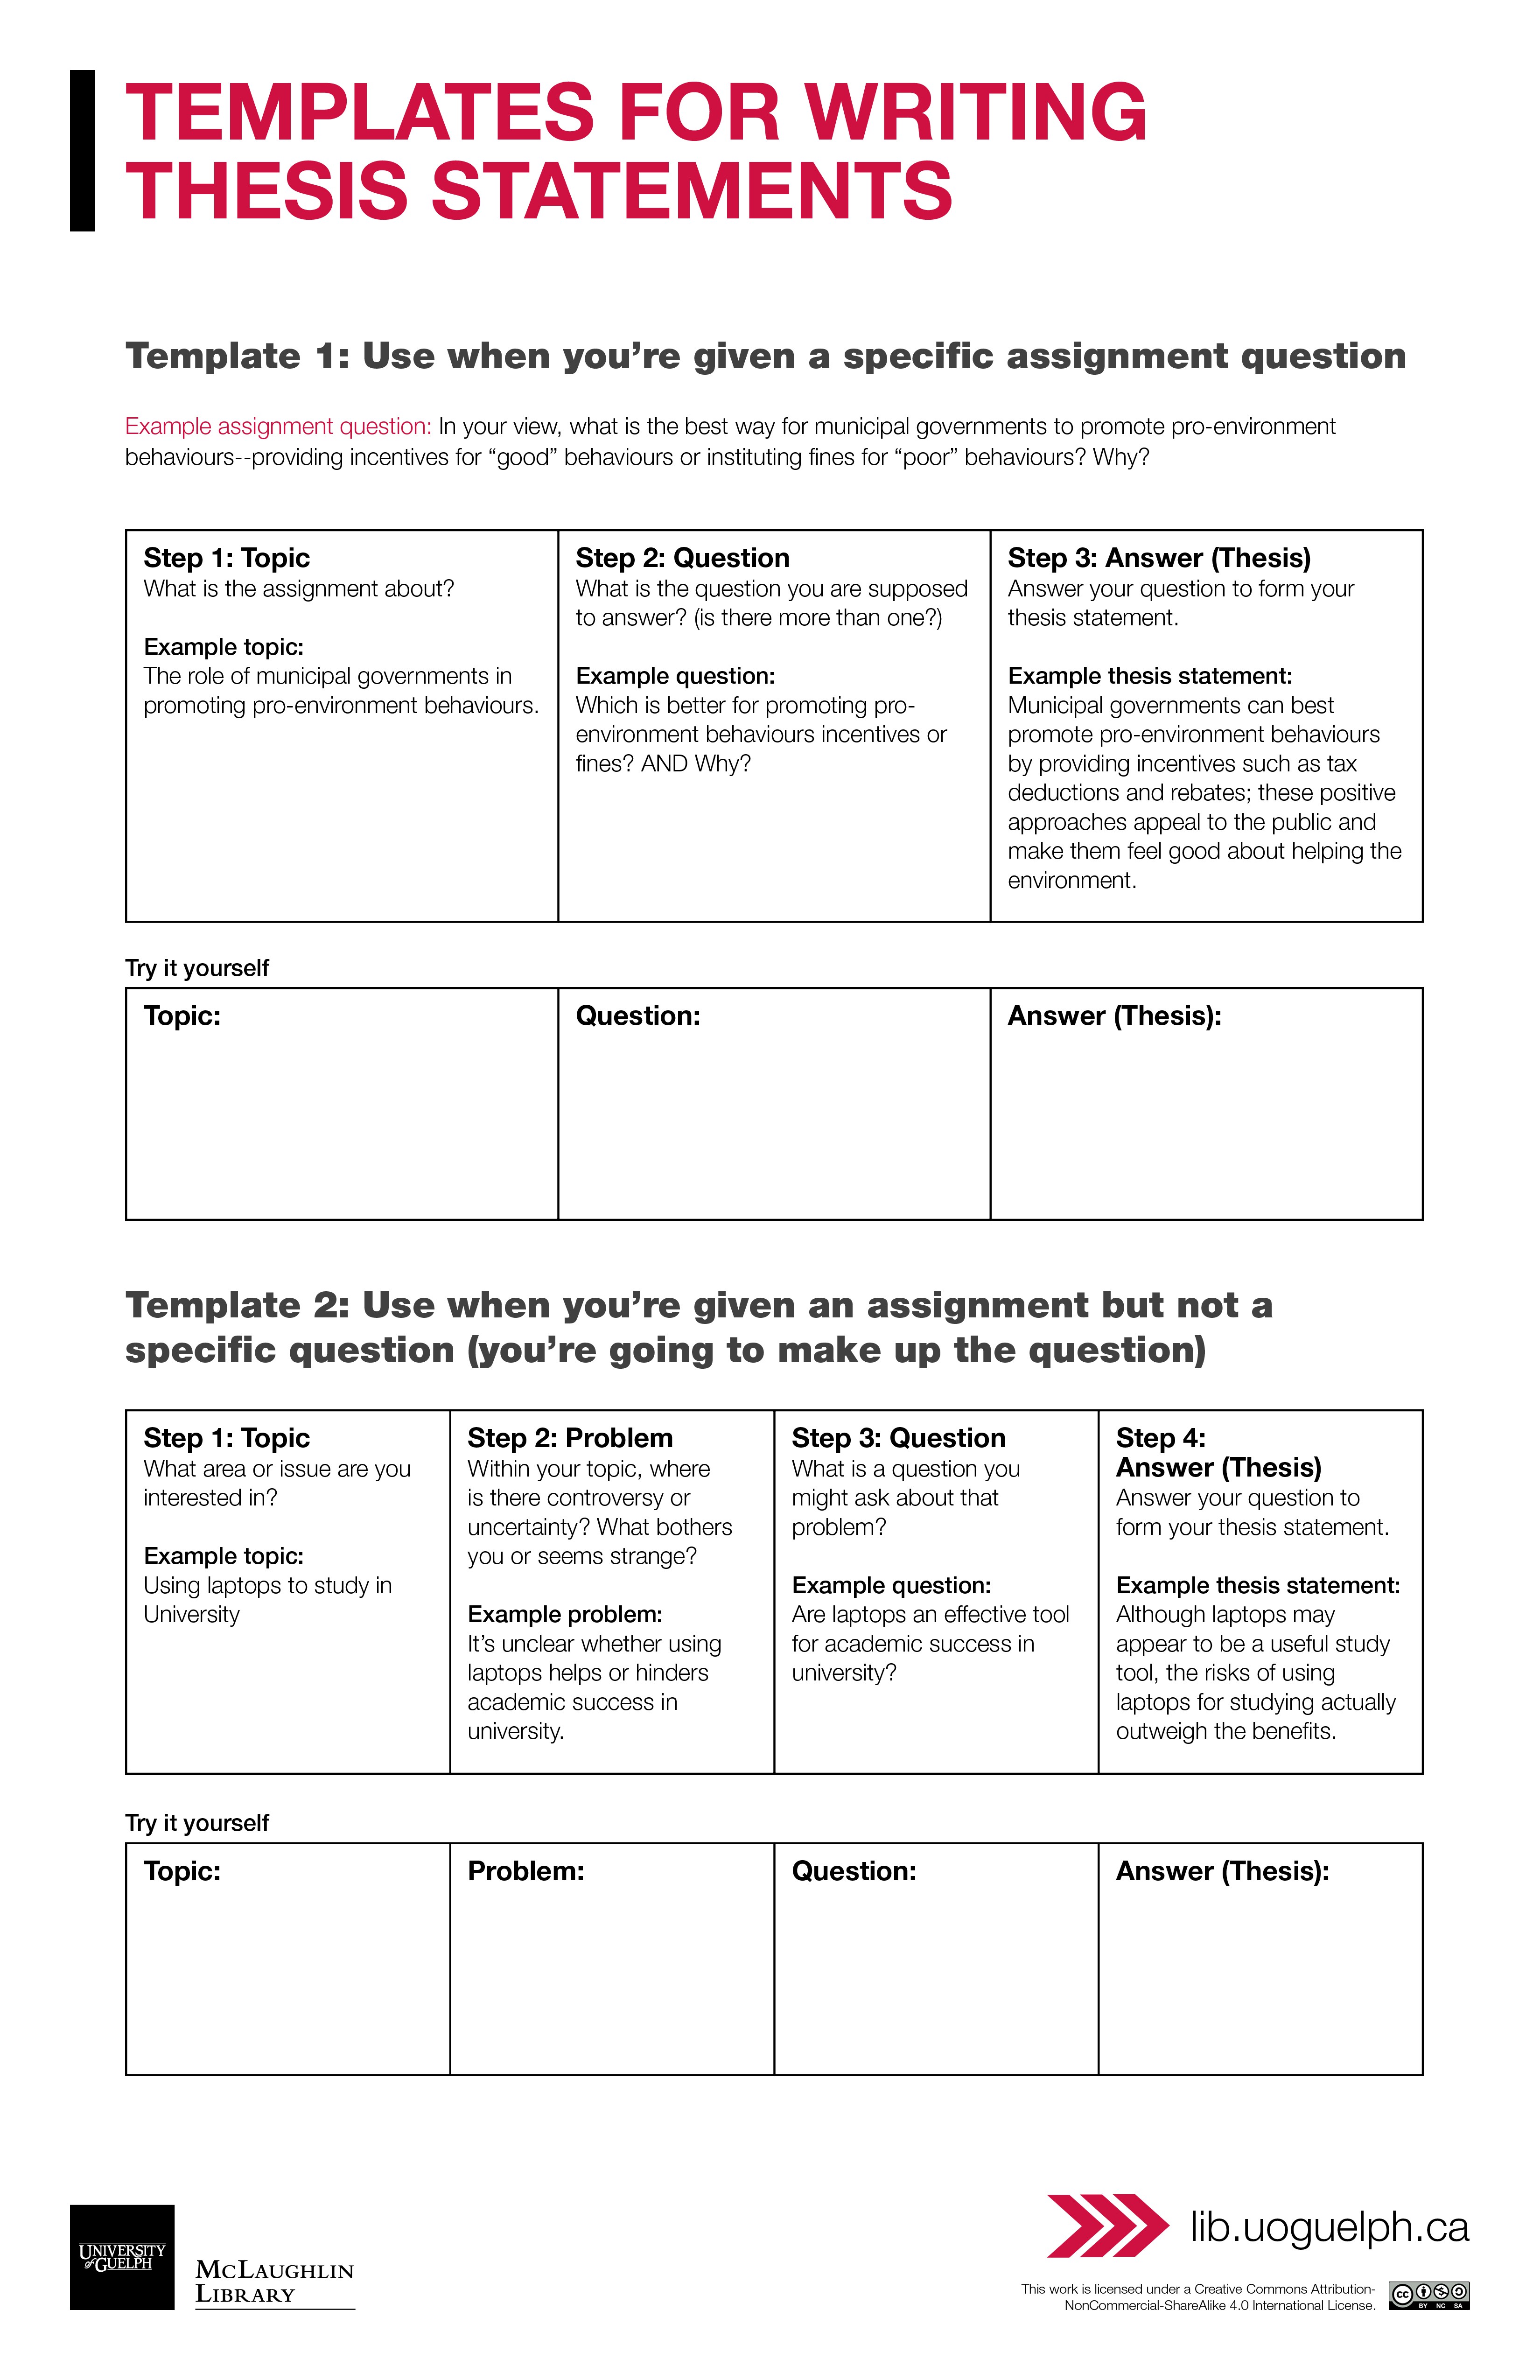 Worksheet: Templates for Writing Thesis Statements. Full Transcript is available below.